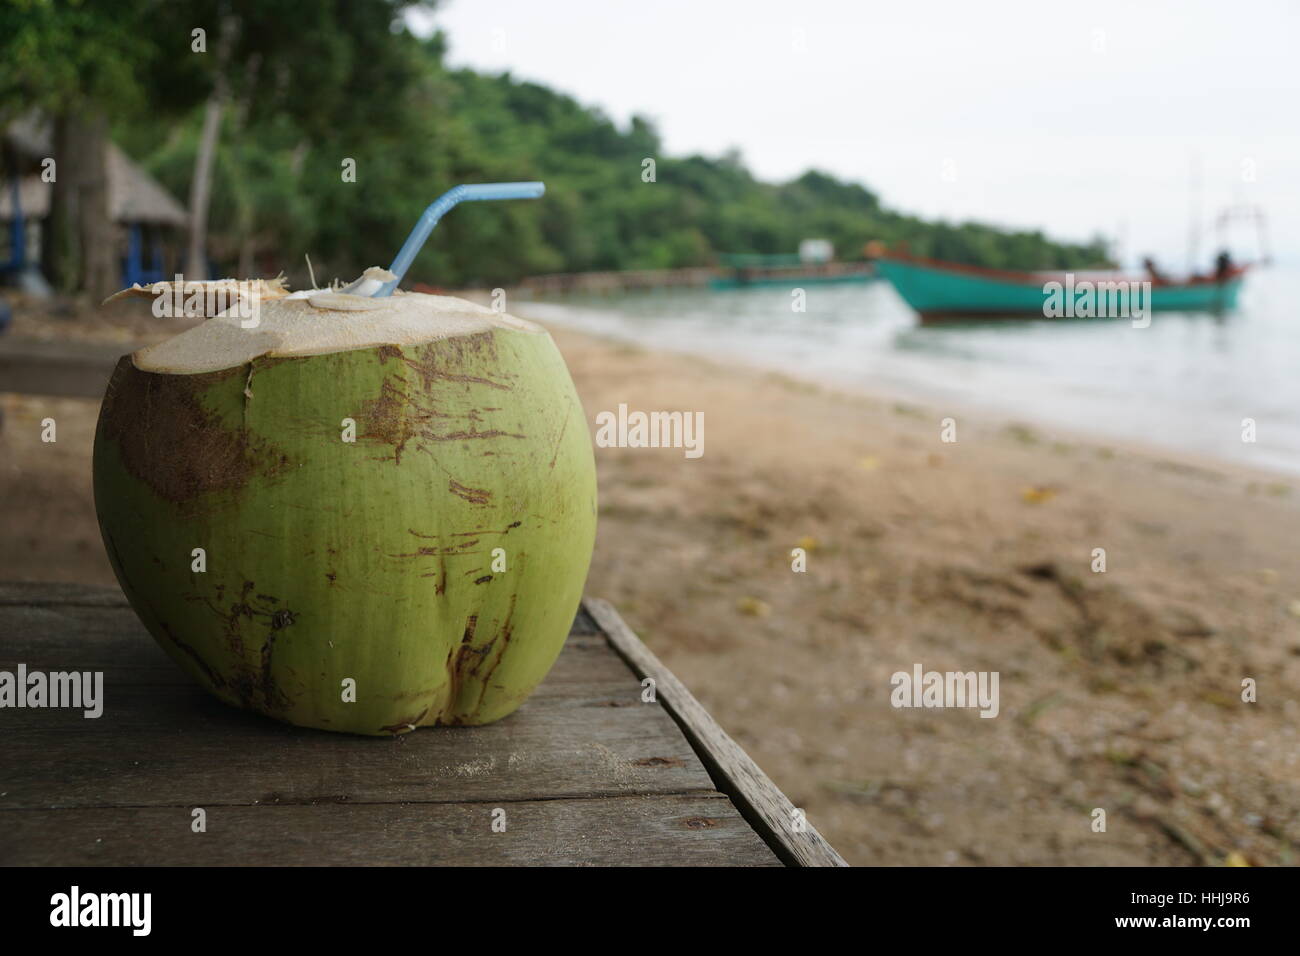 Coconut with Straw on a Bench at a Tropical Beach with Boat in the Background Stock Photo